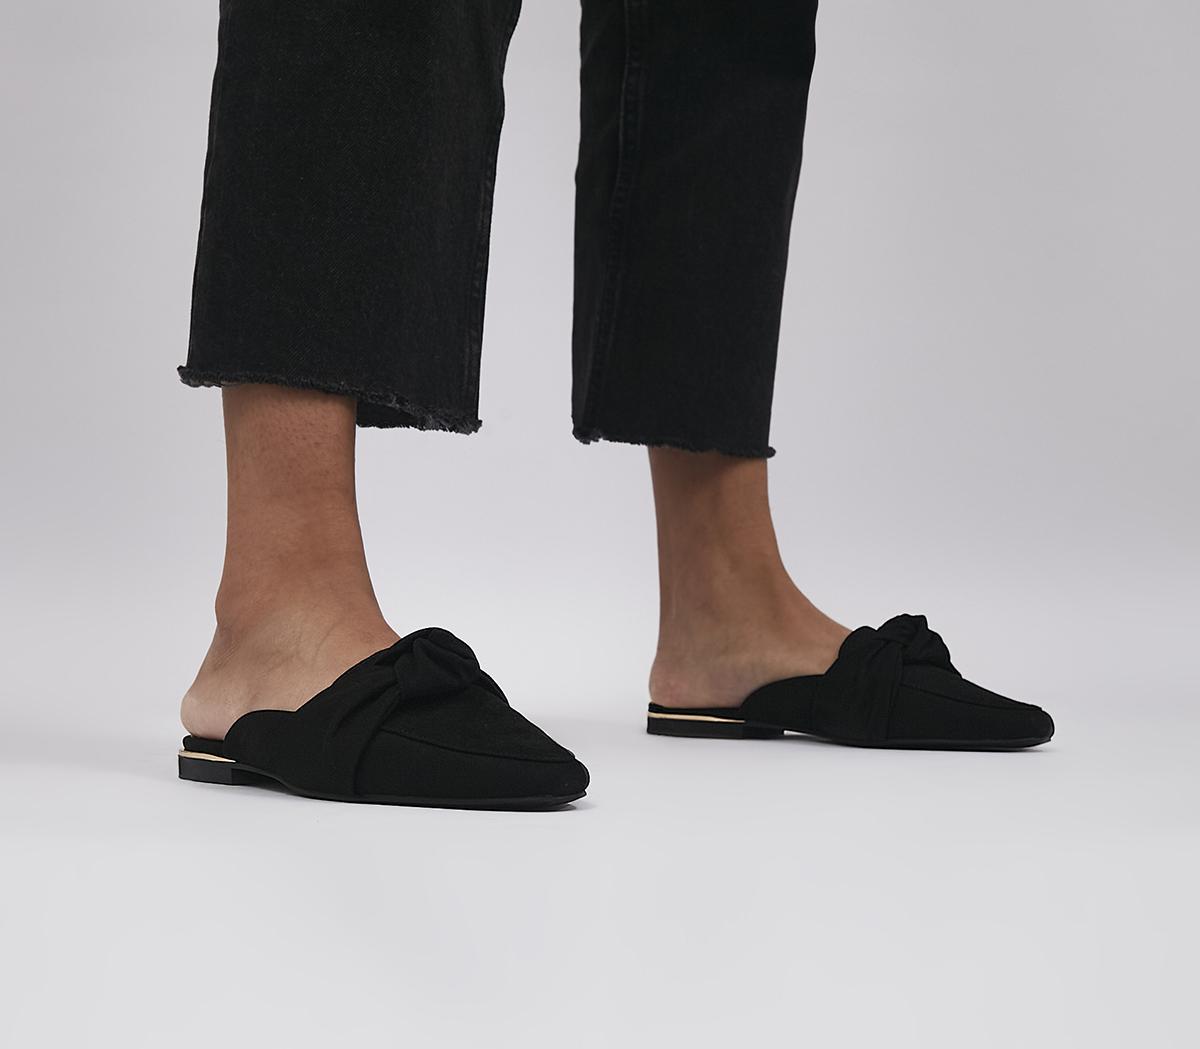 OFFICEFlossy Knot Detail LoafersBlack